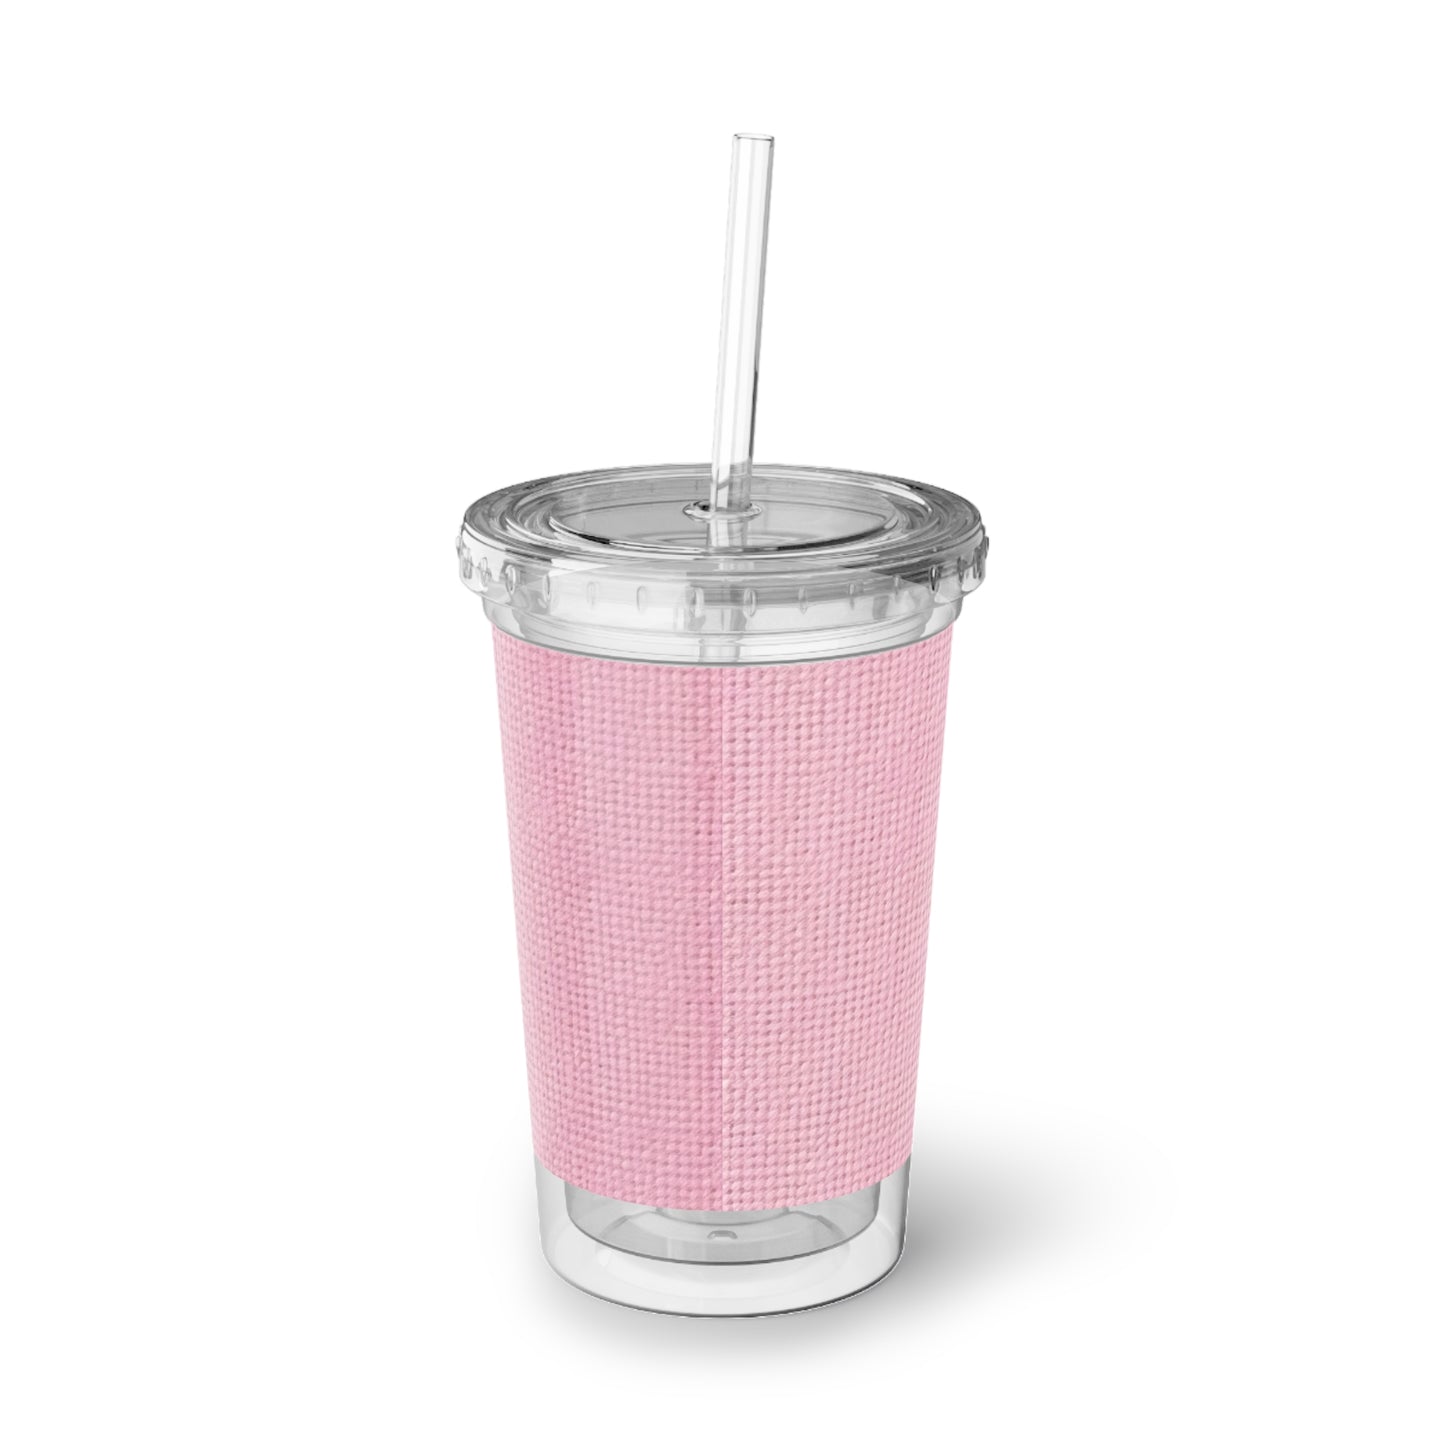 Blushing Garment Dye Pink: Denim-Inspired, Soft-Toned Fabric - Suave Acrylic Cup